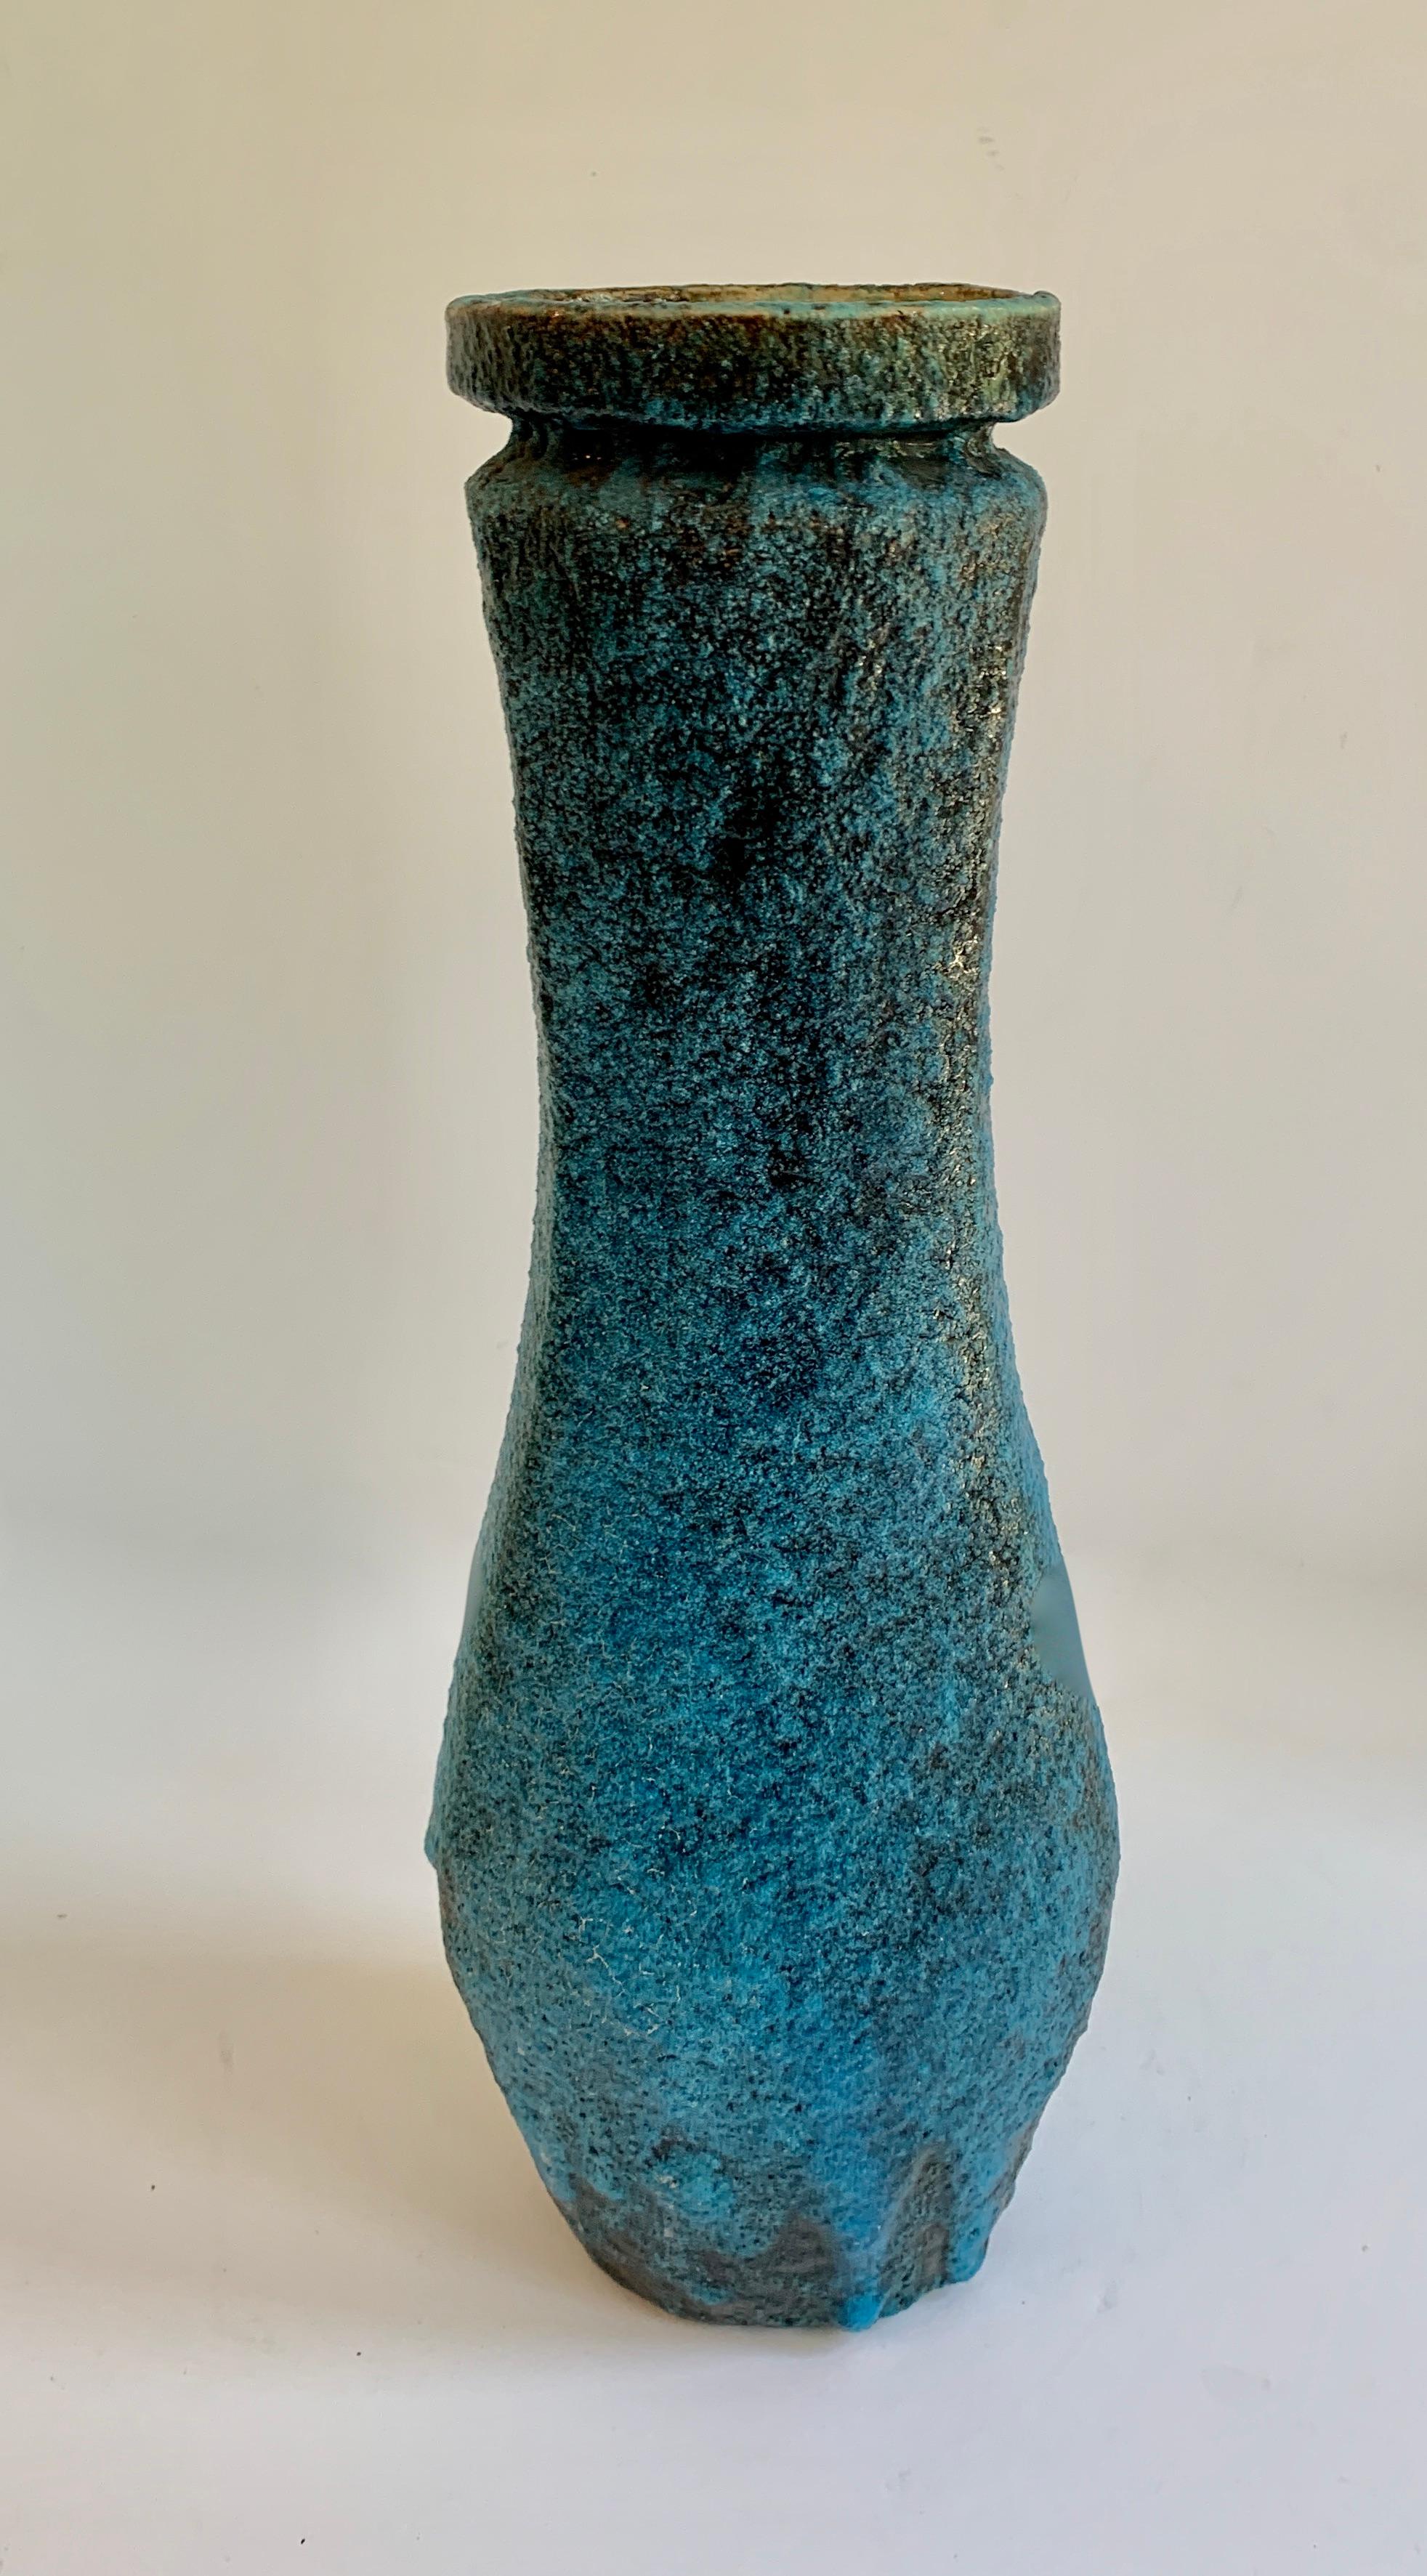 Midcentury vase in Blue volcanic glaze, a unique blend of both blue to black nuances of color. A large and beautifully shaped piece makes a statement as a standalone piece or practical as a vessel.